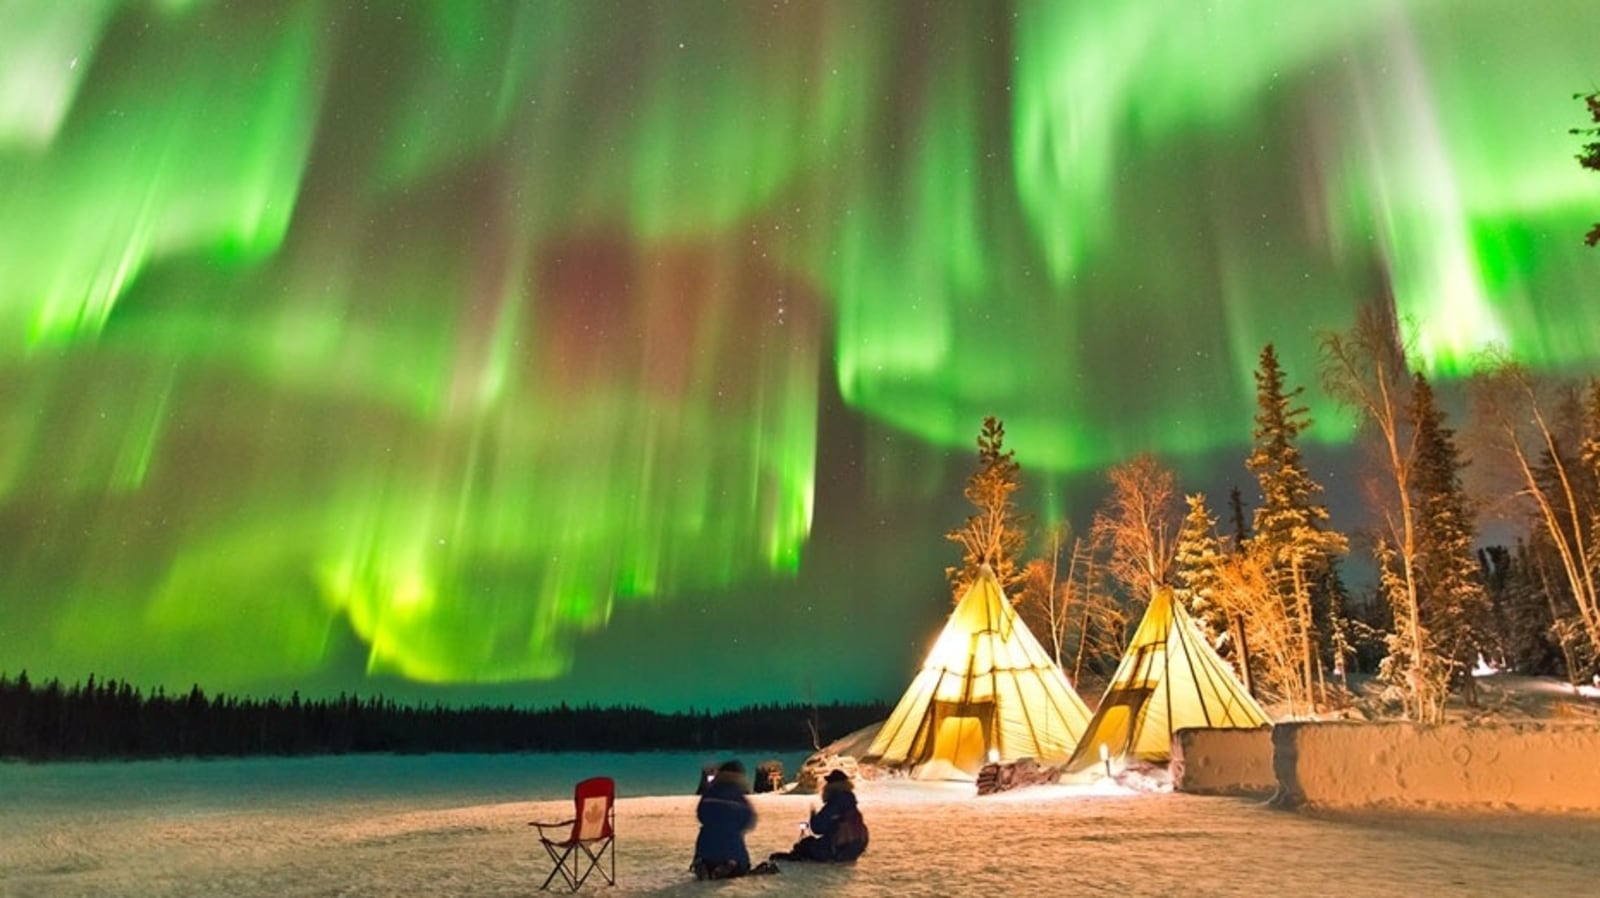 NASA: Wow! Mesmerizing image of Northern Lights shared by astronomer